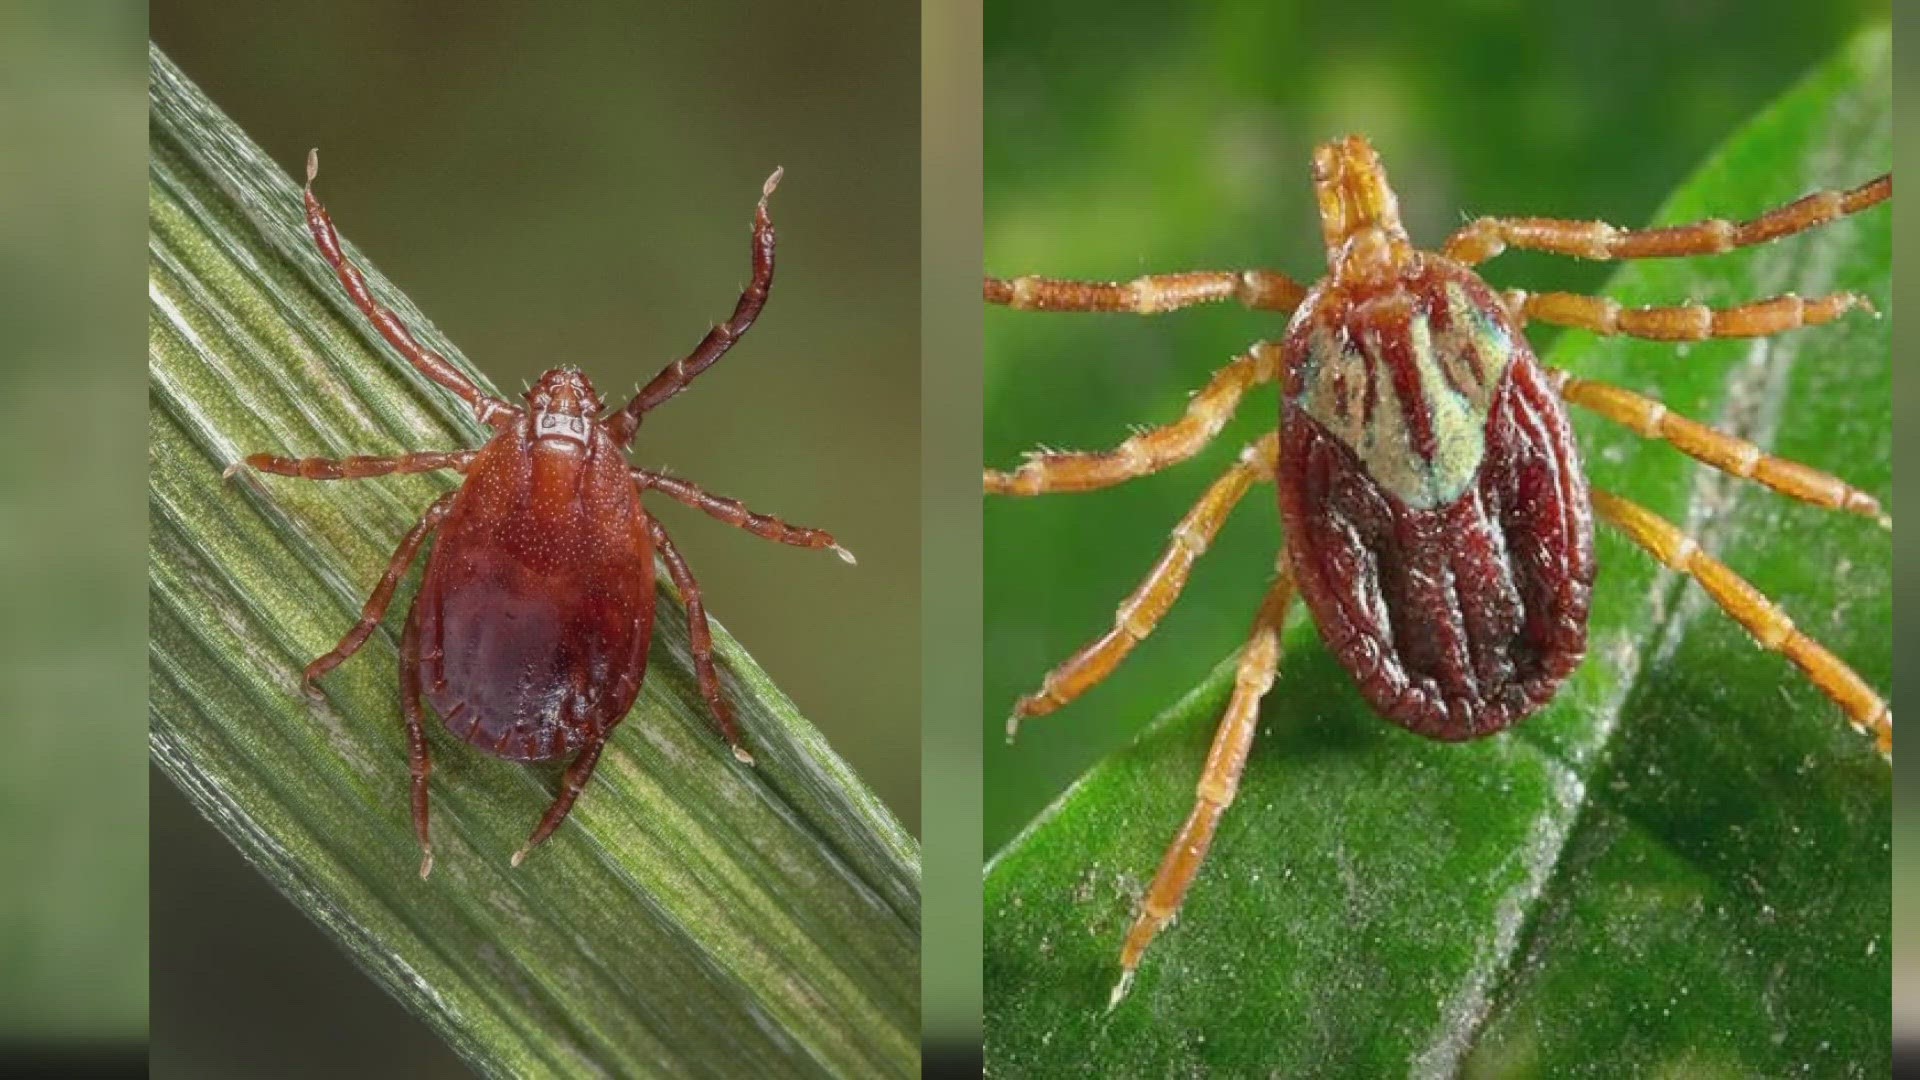 Delaware Public Health District staff are continuing to capture and monitor ticks in the county.